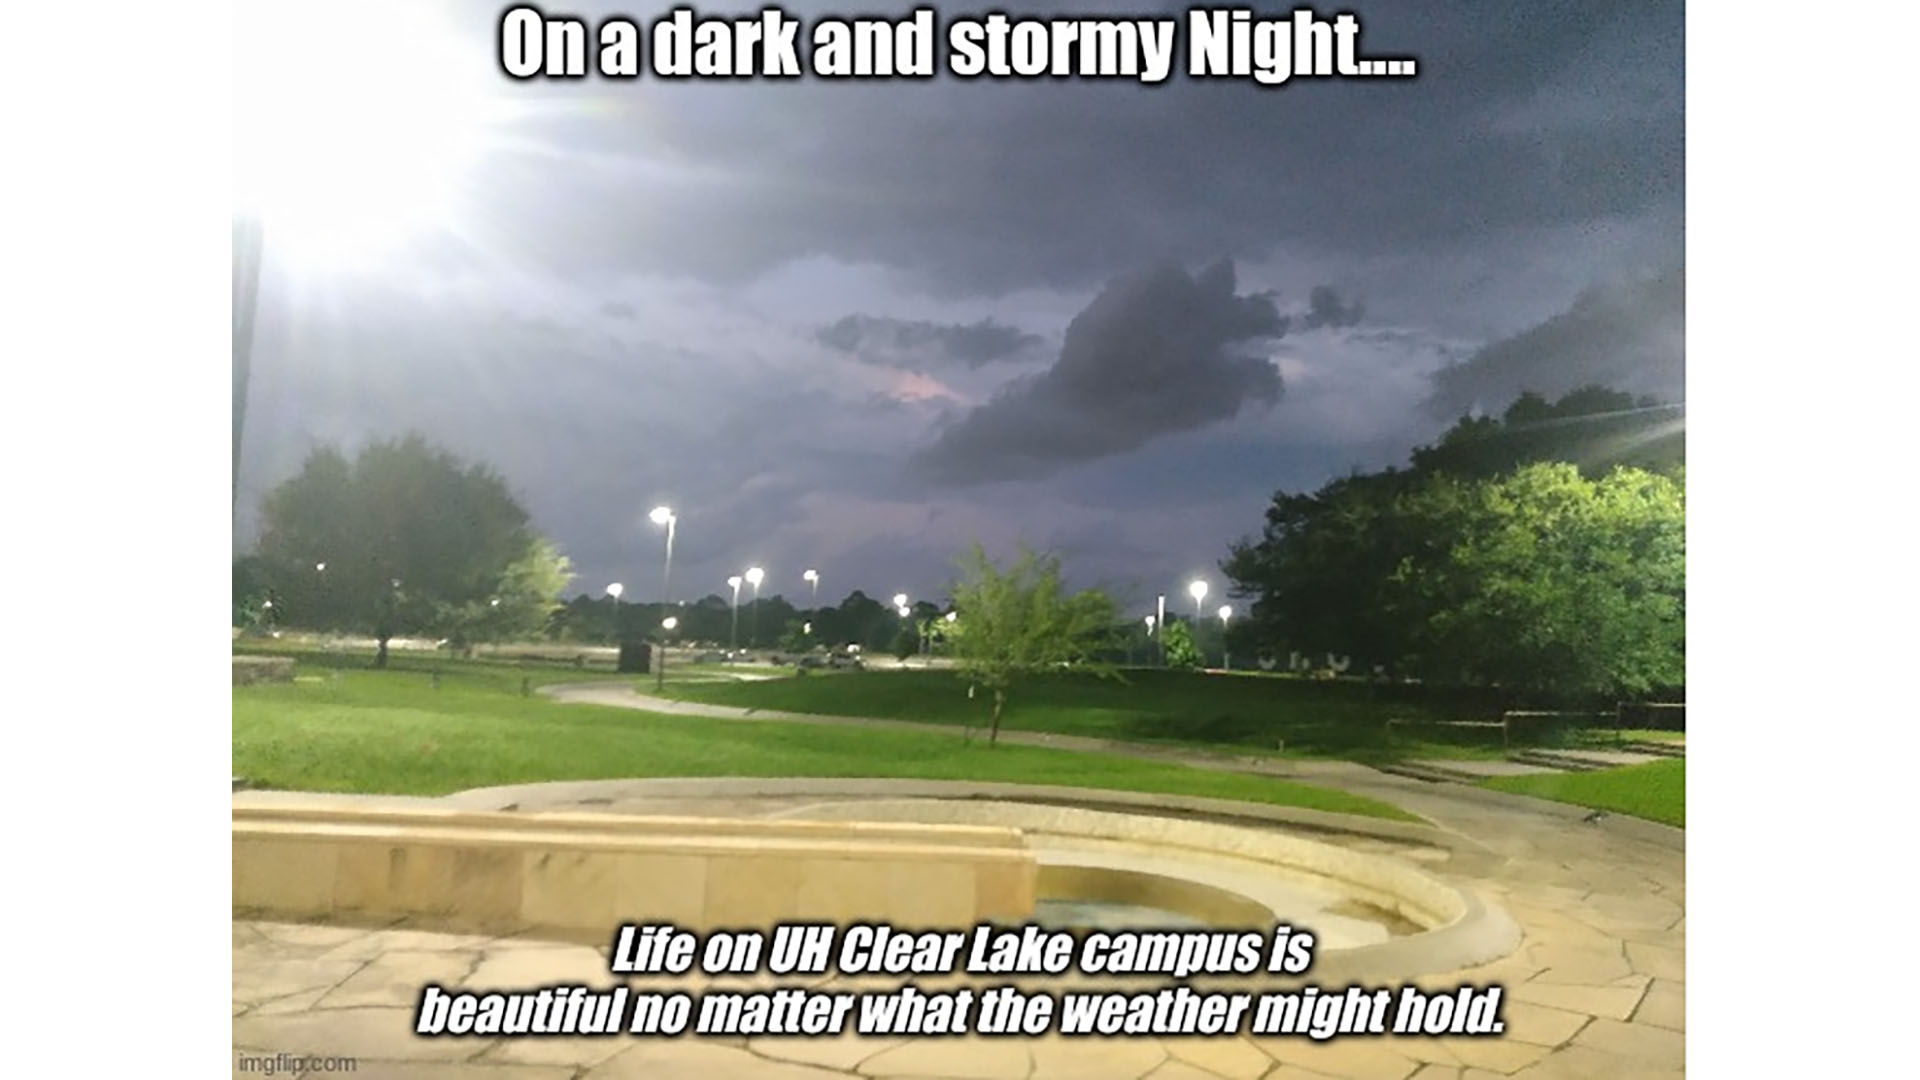 A picture of campus at night. Caption: On a dark and stormy night, life on UH Clear Lake campus is beautiful no matter what the weather might hold.